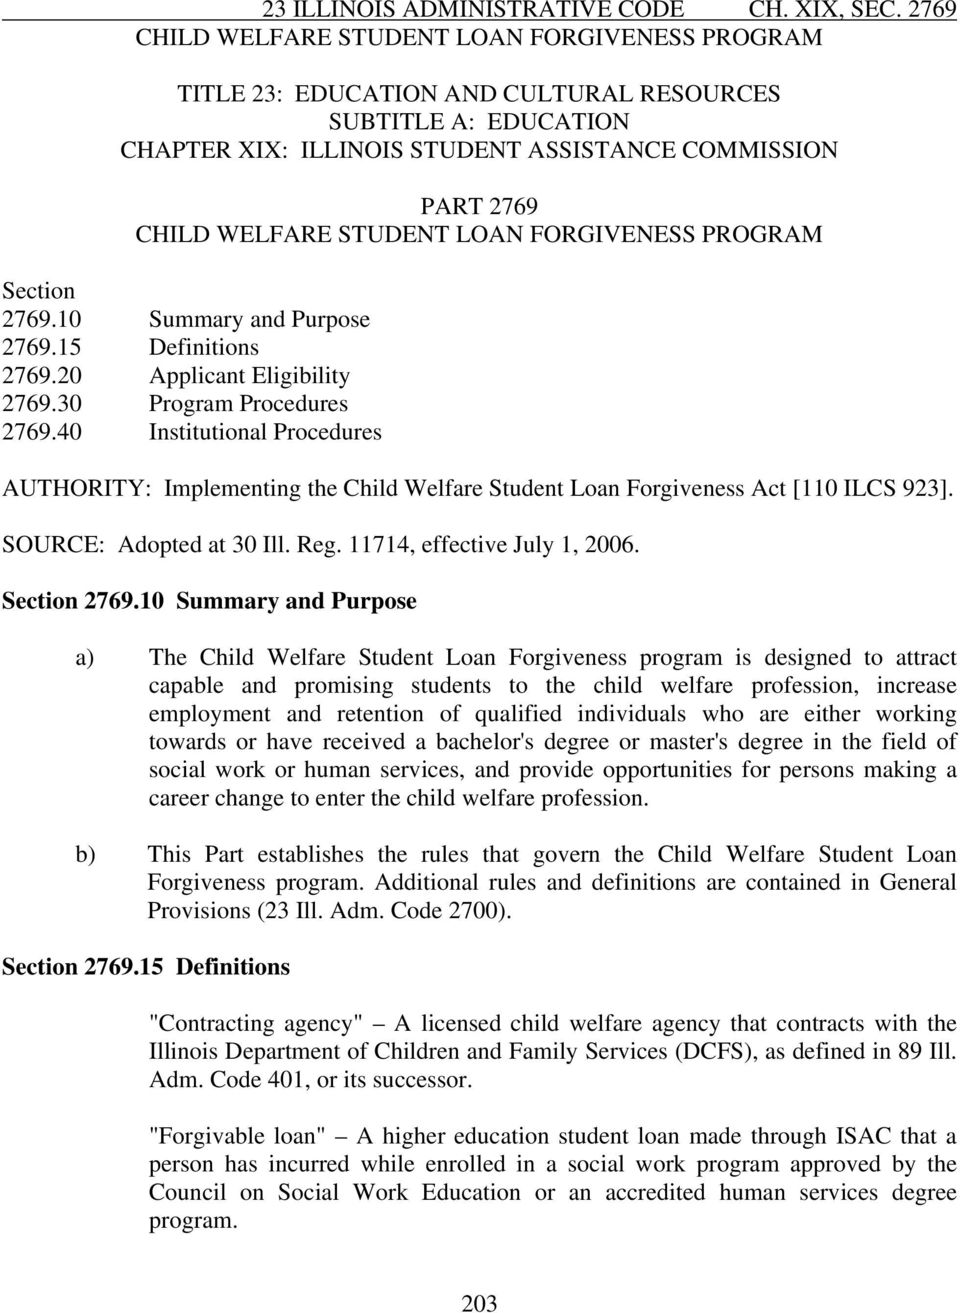 40 Institutional Procedures AUTHORITY: Implementing the Child Welfare Student Loan Forgiveness Act [110 ILCS 923]. SOURCE: Adopted at 30 Ill. Reg. 11714, effective July 1, 2006. Section 2769.